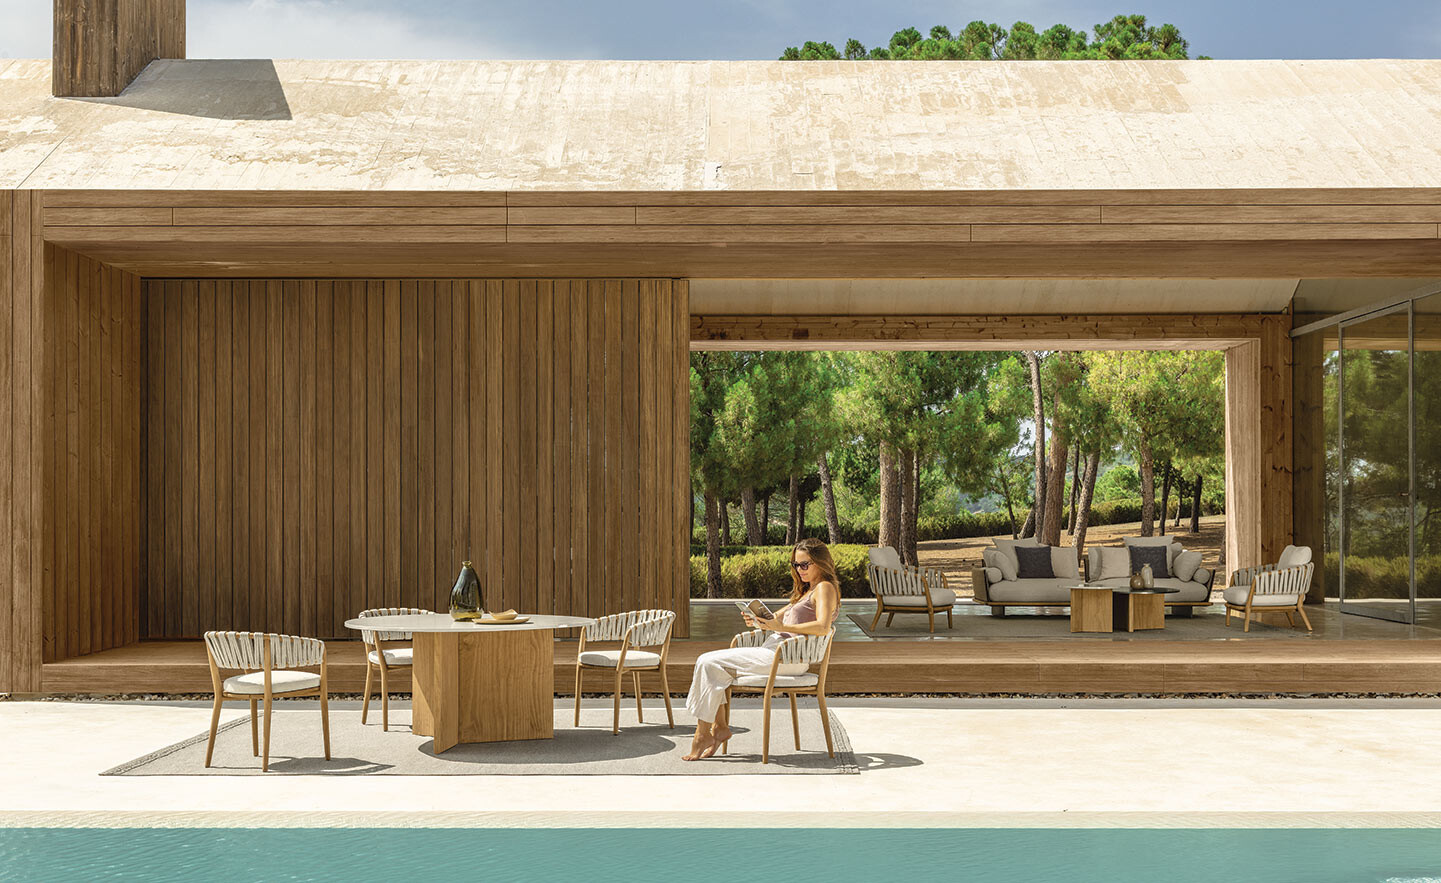 Talenti Outdoor Living: Where design meets sustainability